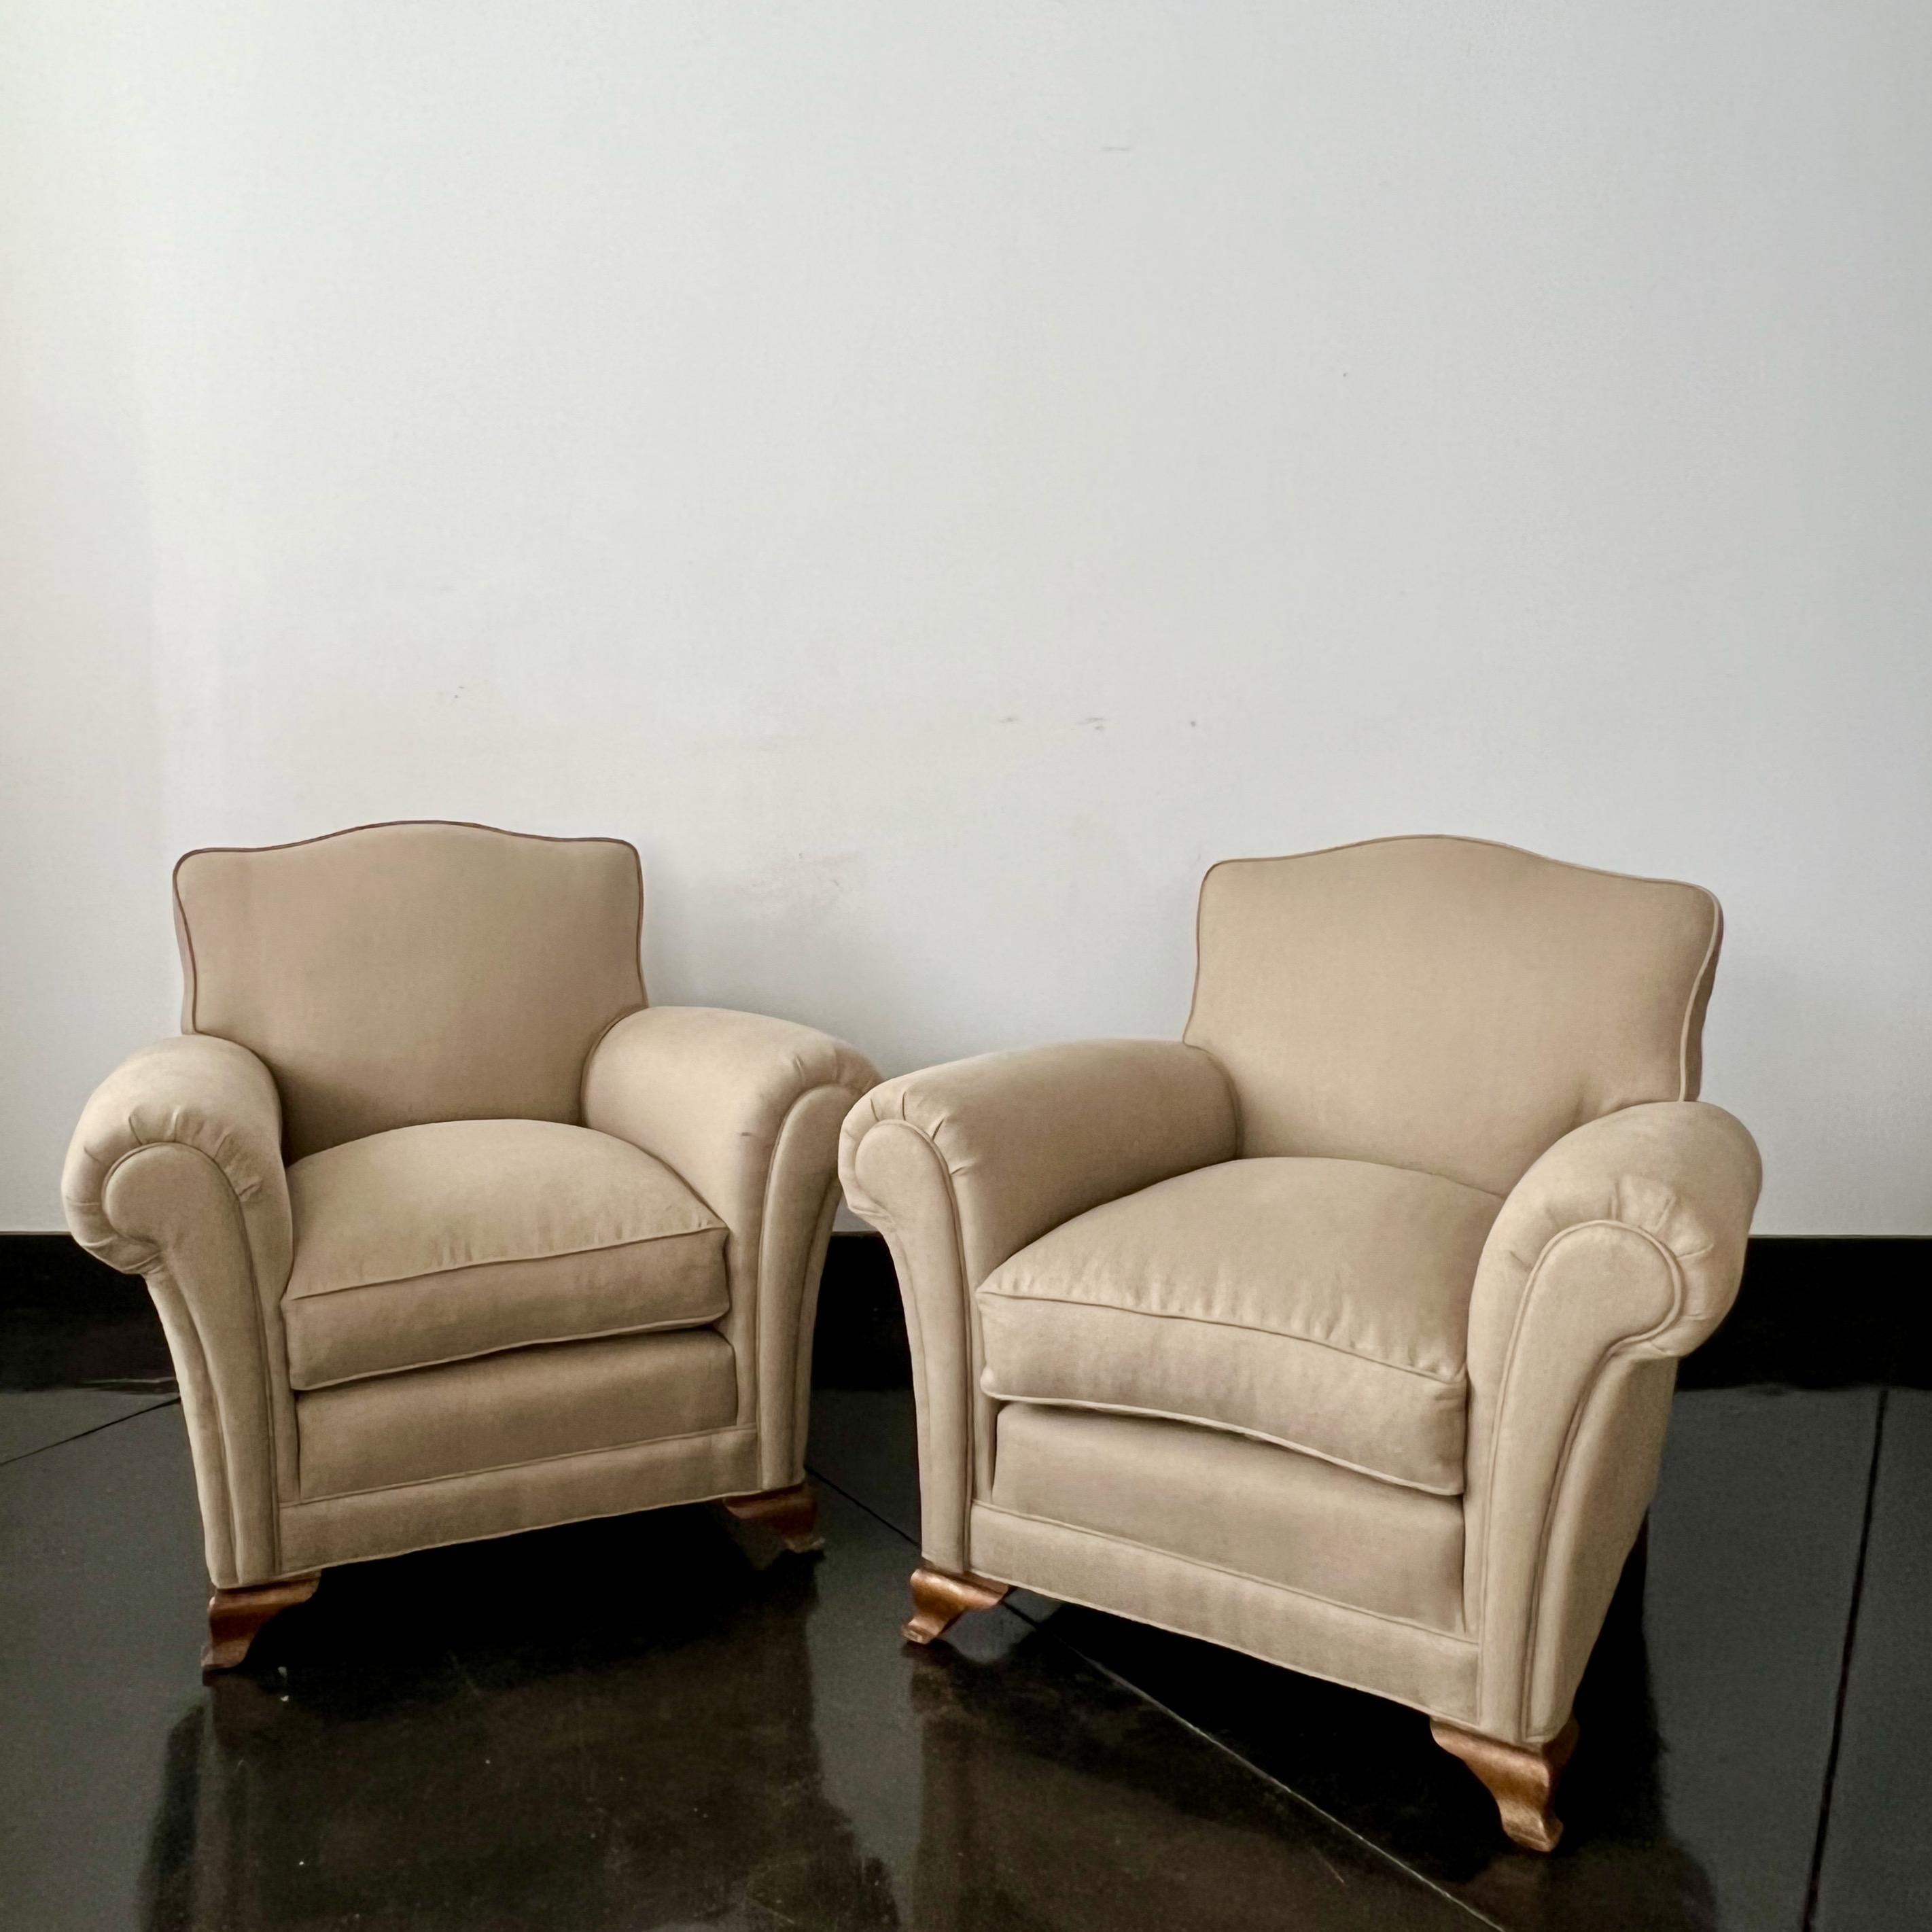 Pair of vintage French club chairs from 40's reupholstered in linen on gilded shaped feet.
These chairs are very sturdy and comfortable, with a french club chair shape.
Paris, France

seat size:
20